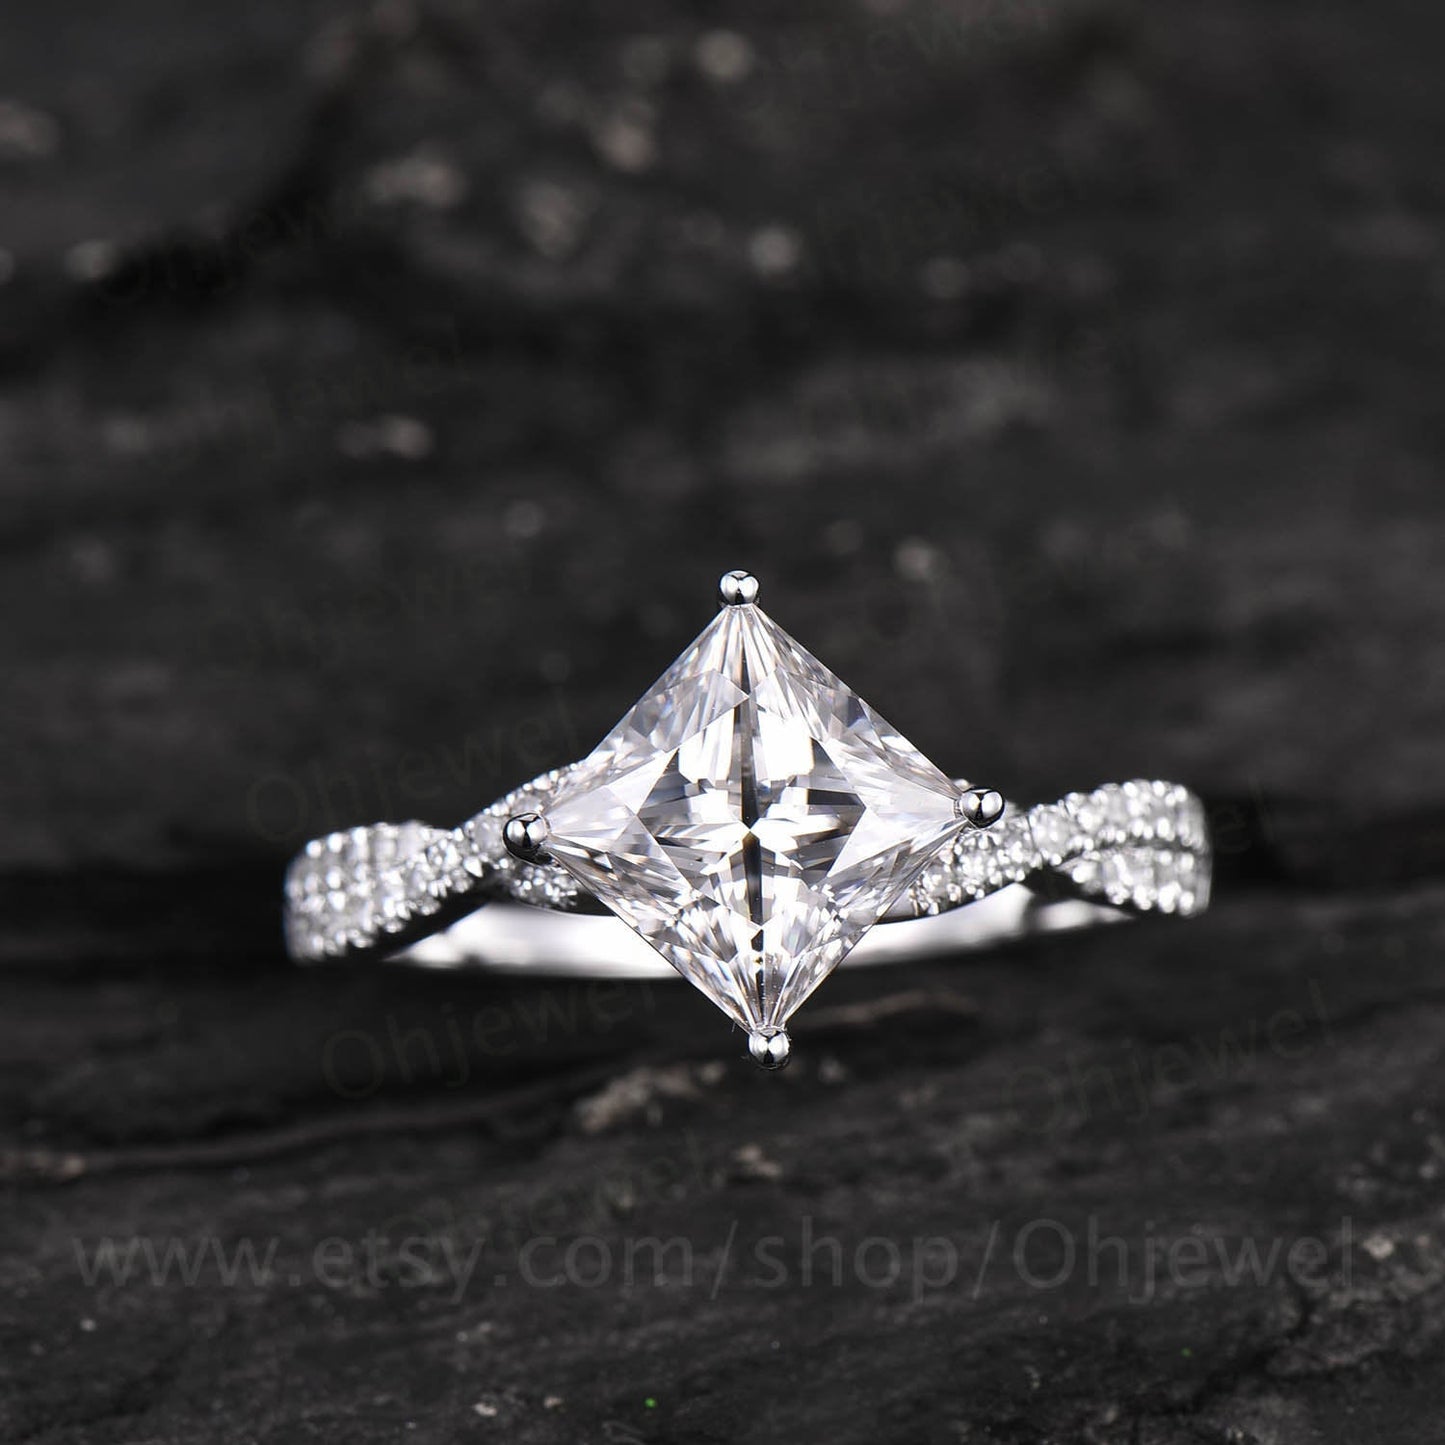 Unique vintage princess cut engagement ring moissanite engagement ring solid 14k 18k white gold promise bridal wedding ring anniversary gift